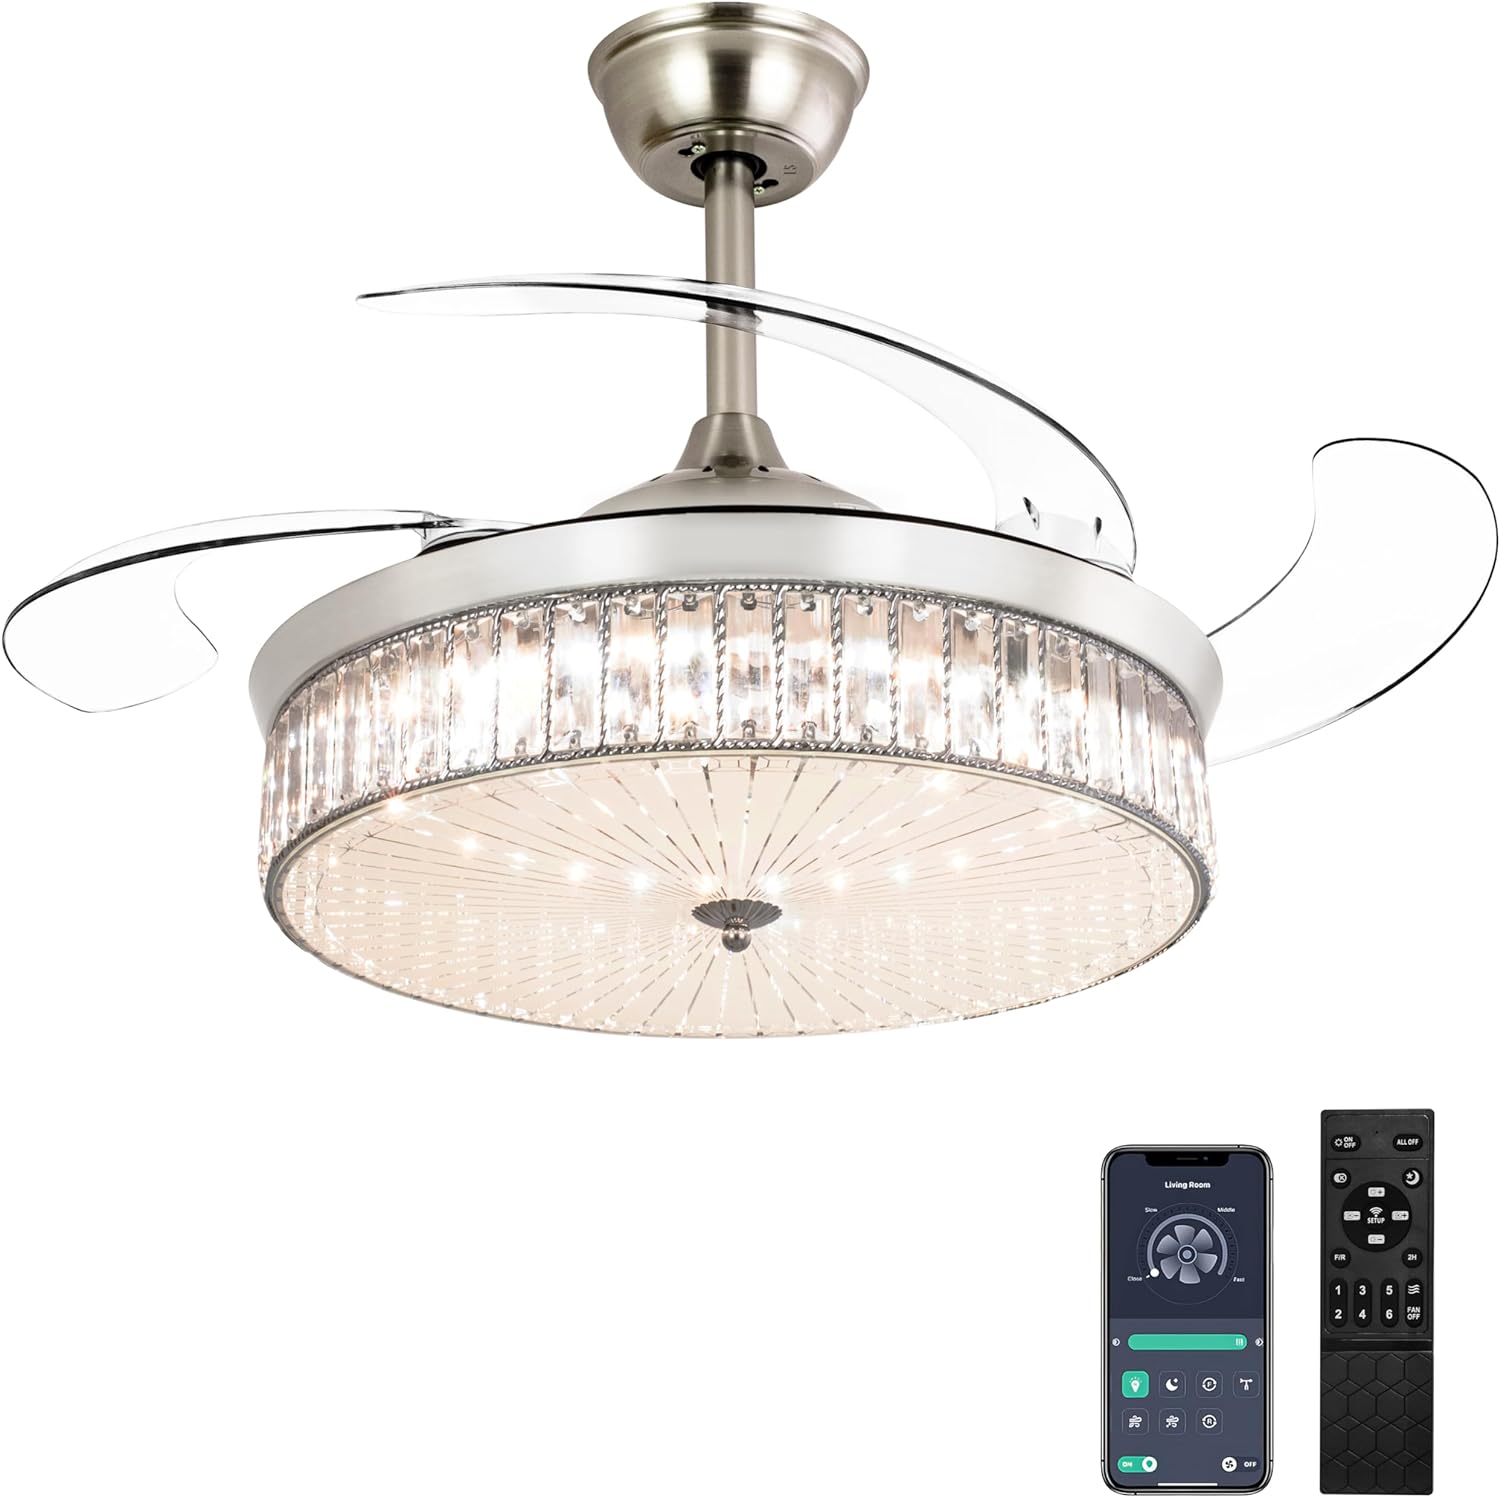 Quality of all the materials used in this fan is excellent for the price. Chandelier fan is made of high quality crystal clear metal lamp body. Led light contains 3 modes of light, I prefer cold white all the time. Fan circulates both cold and warm air in different modes. Can change the mode as per the weather. Glass lampshade is stable and looks durable. Reversible dc motor helps in changing the direction of fan as and when required. Size shape and design makes it look stylish. Motor works sile